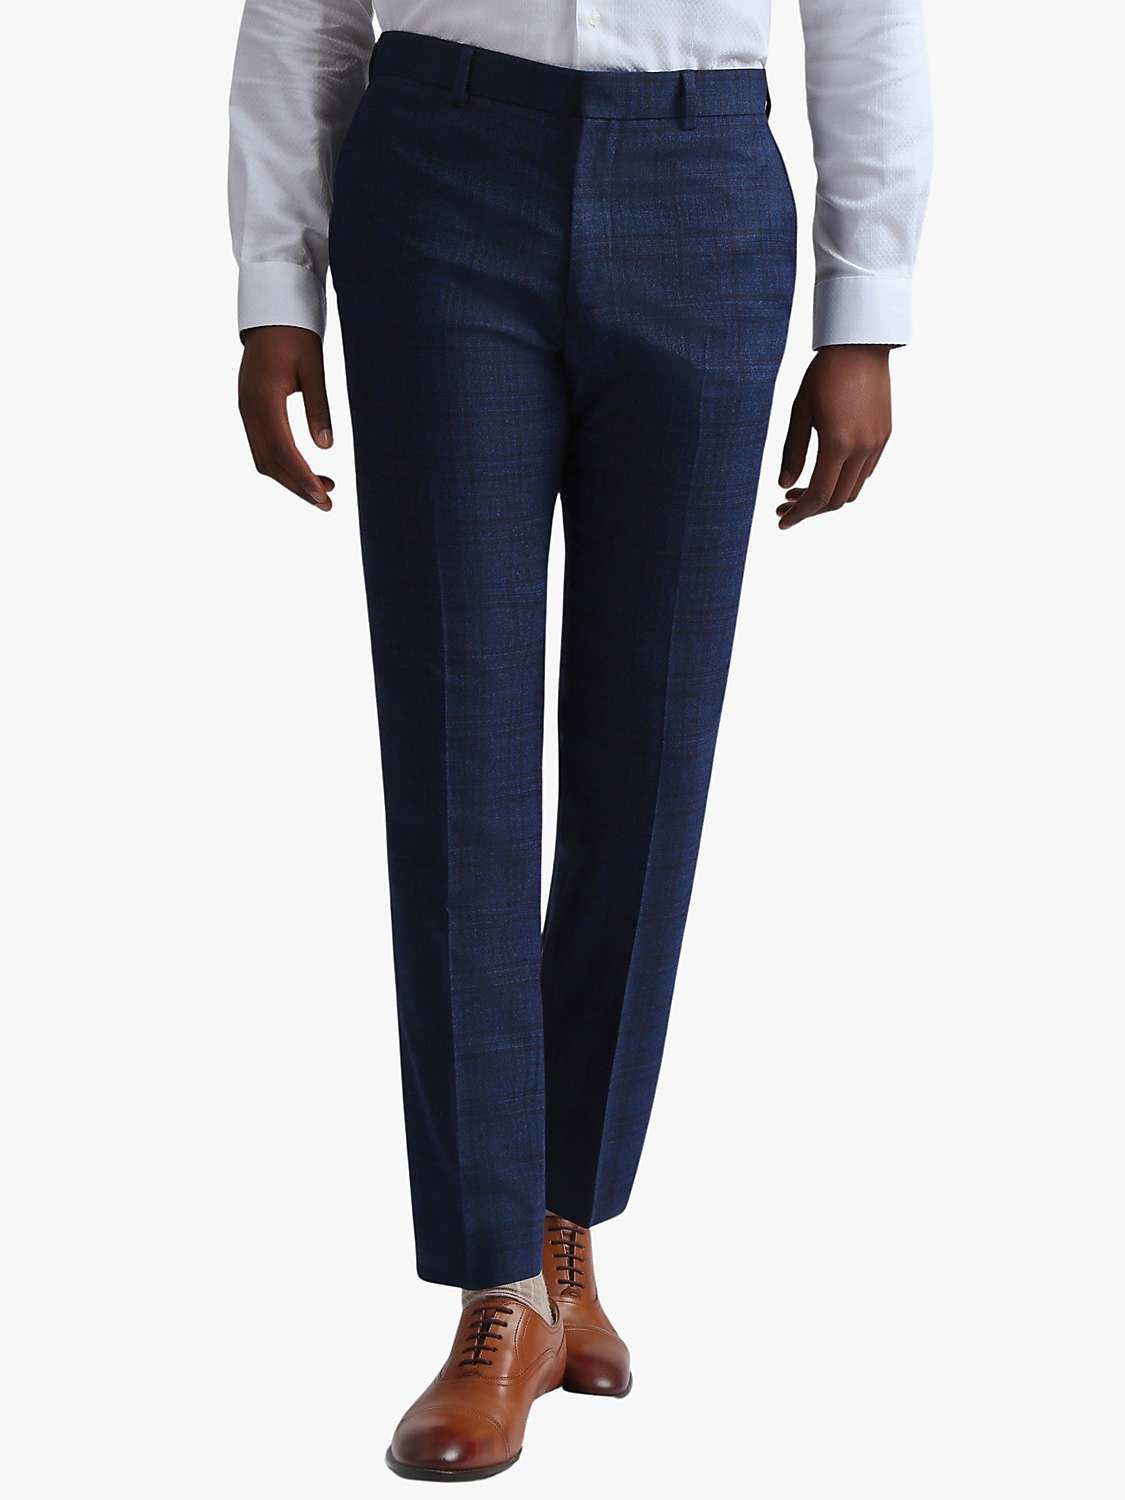 Buy Ted Baker Munro Slim Fit Check Suit Trousers, Navy Online at johnlewis.com